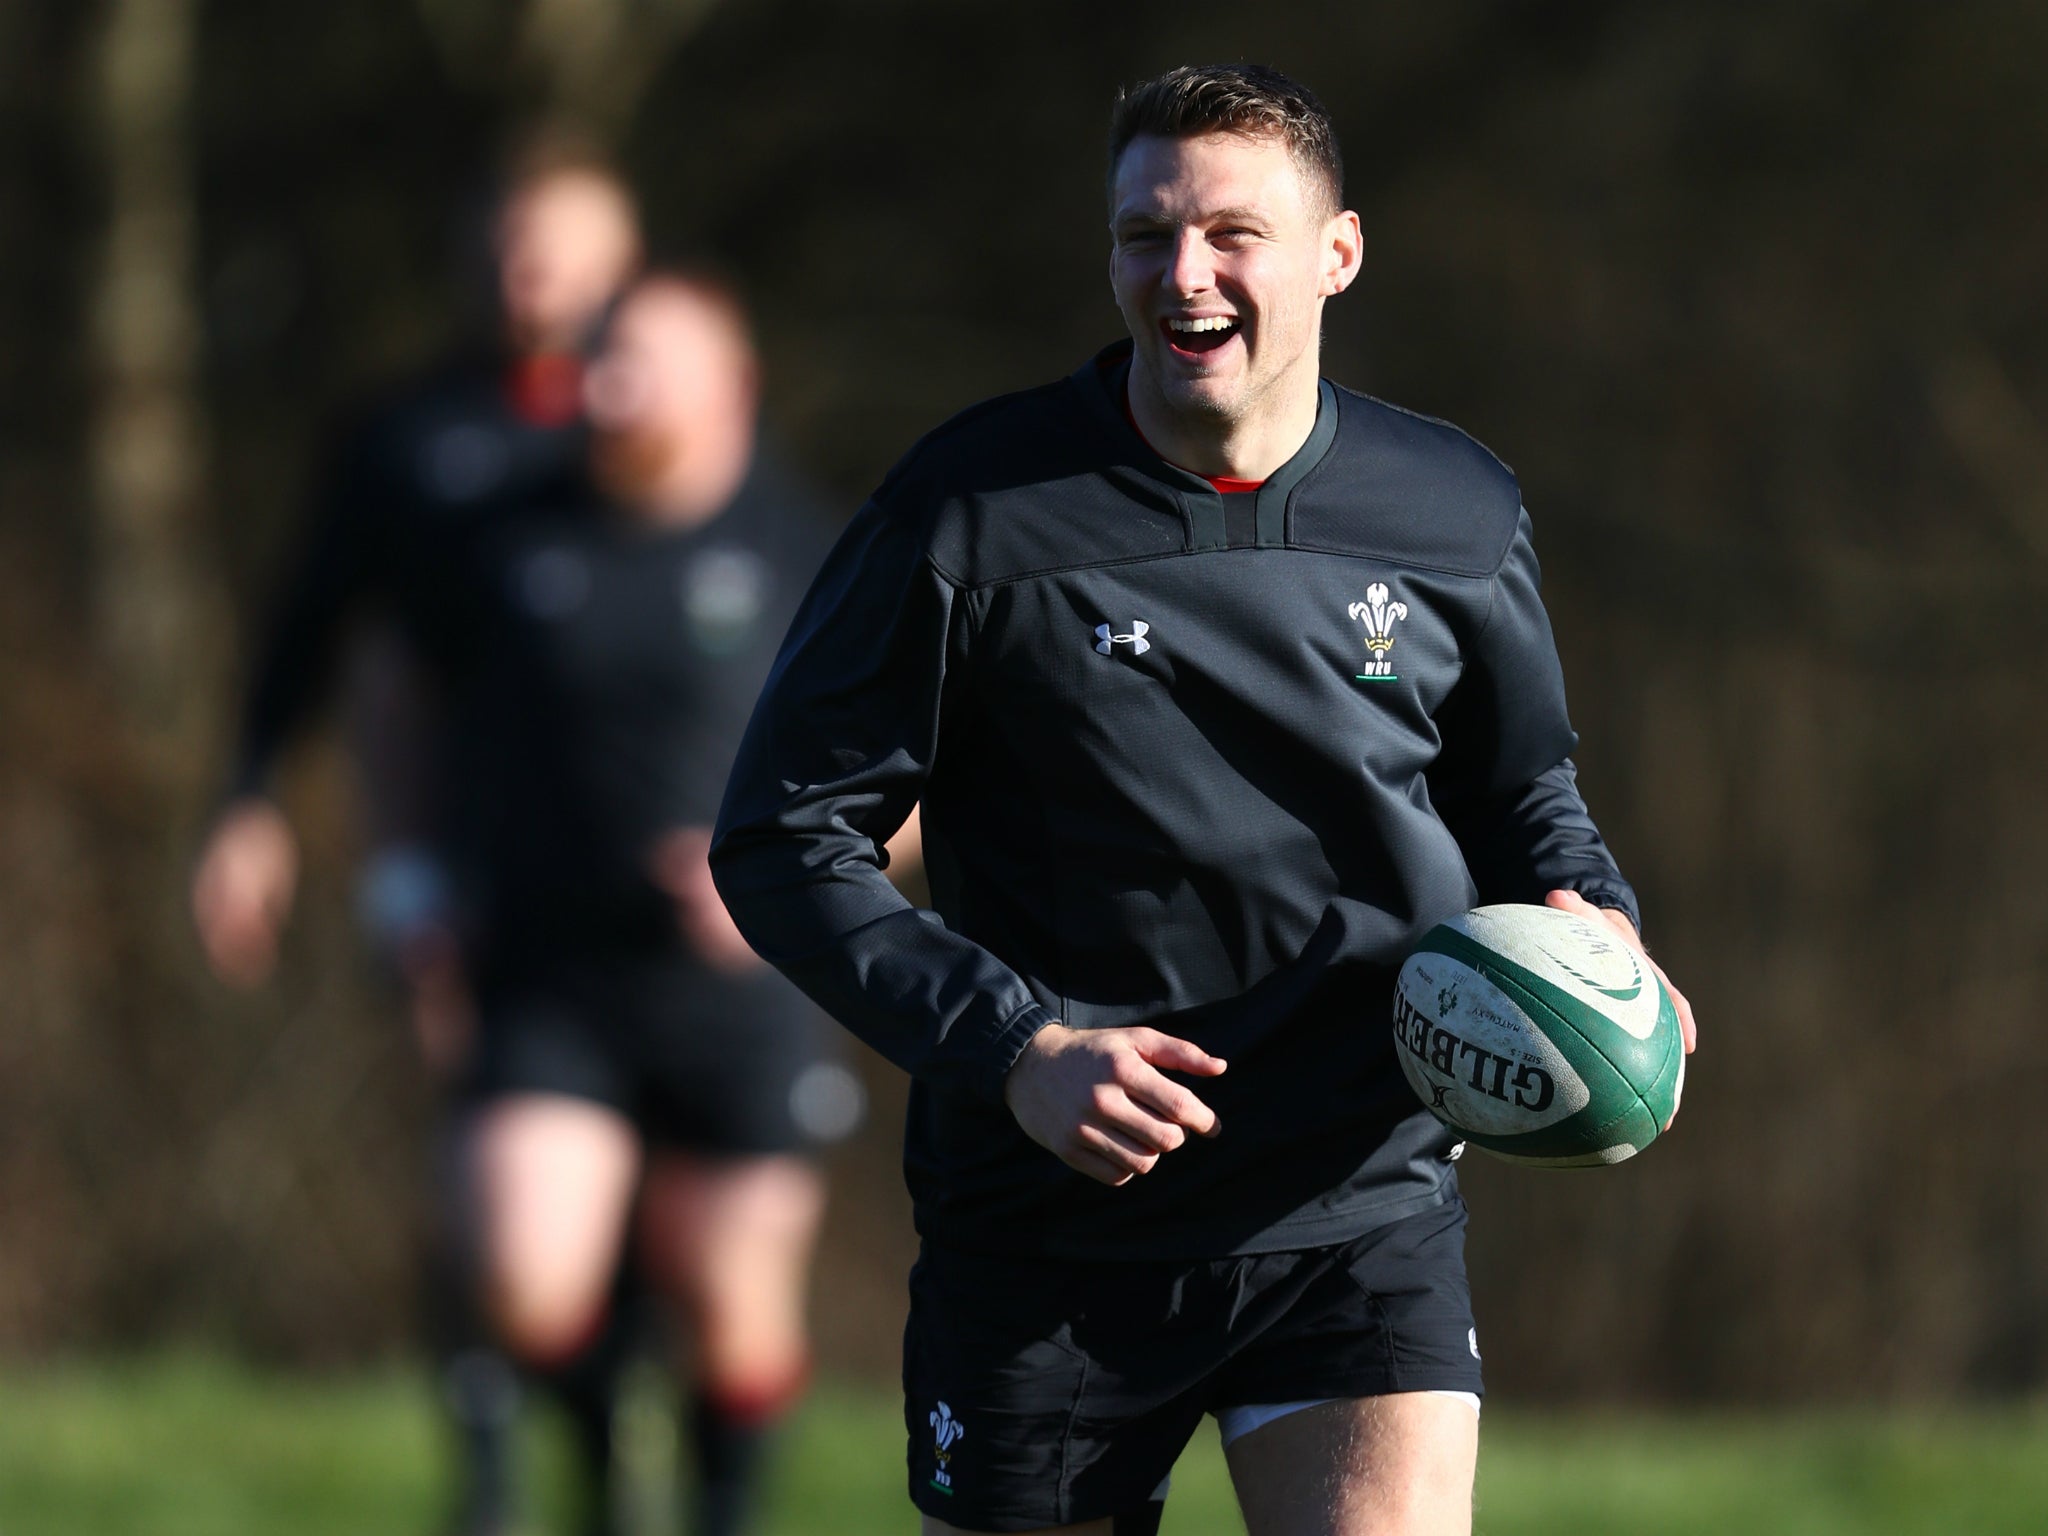 Biggar returned to Wales duty last weekend but was unable to prevent the defeat by Ireland